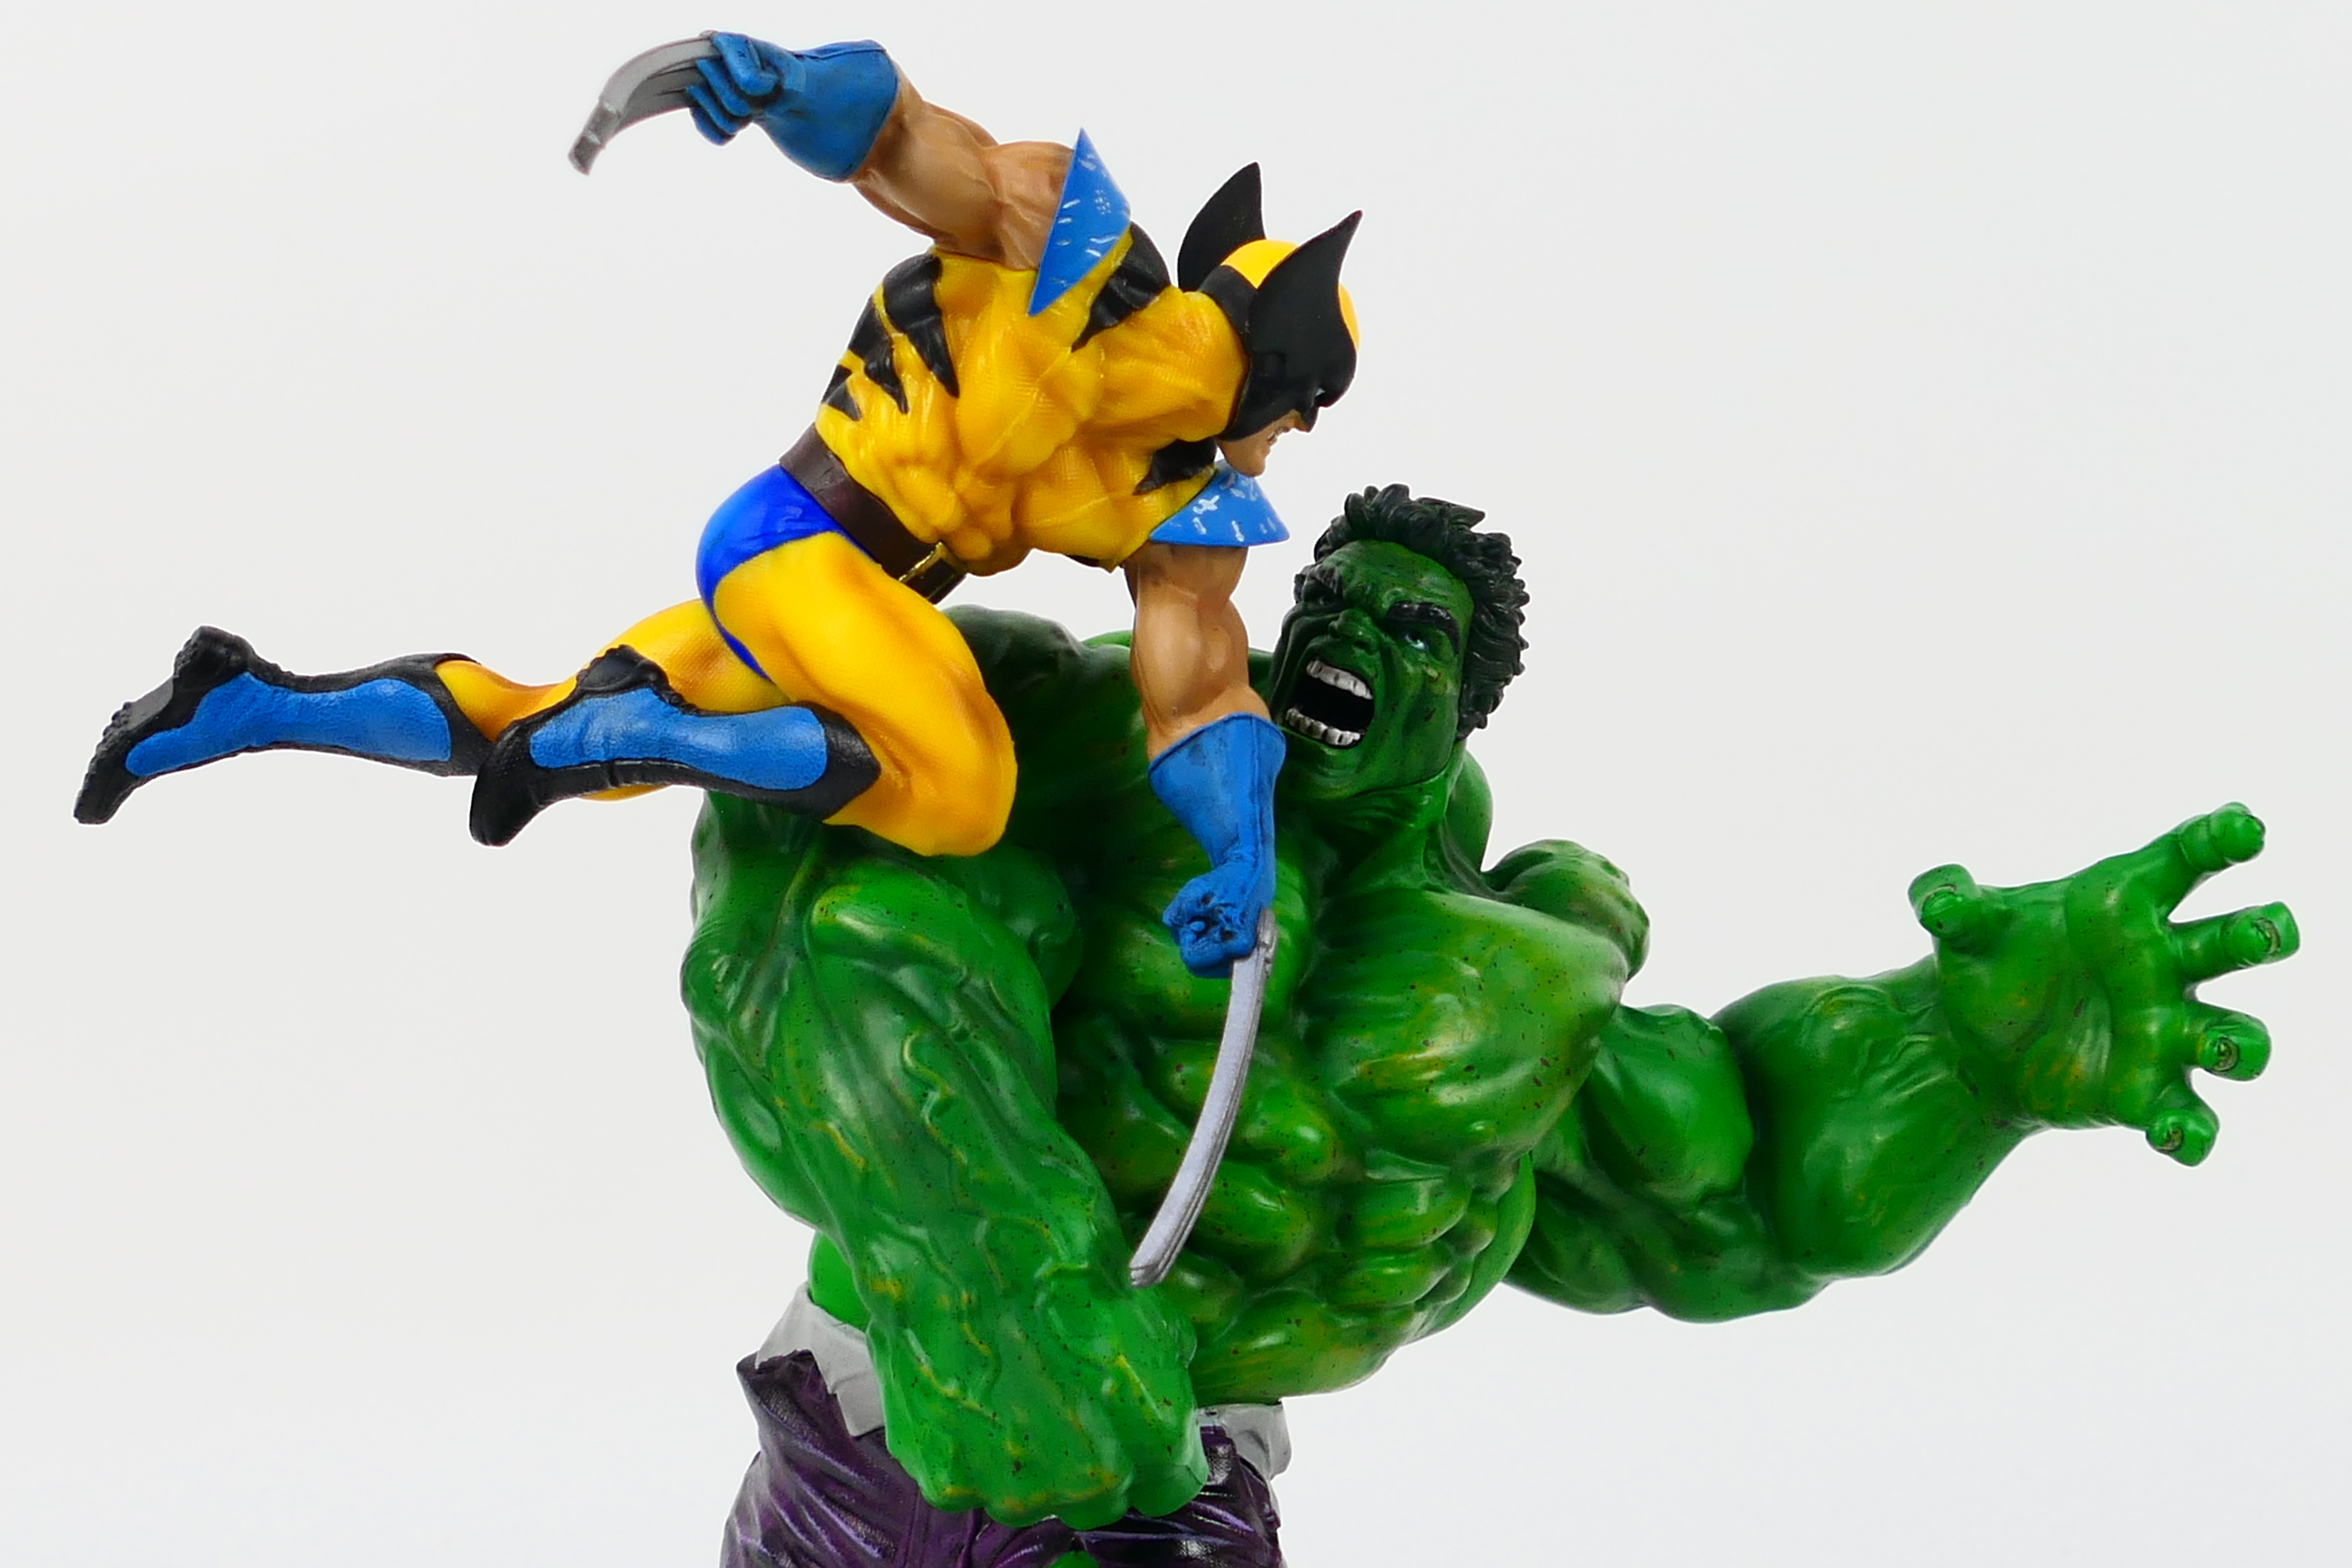 Tianbaotoys - Marvel - A boxed Hulk vs. Wolverine statue which is approximately 12 inches tall. - Image 4 of 6